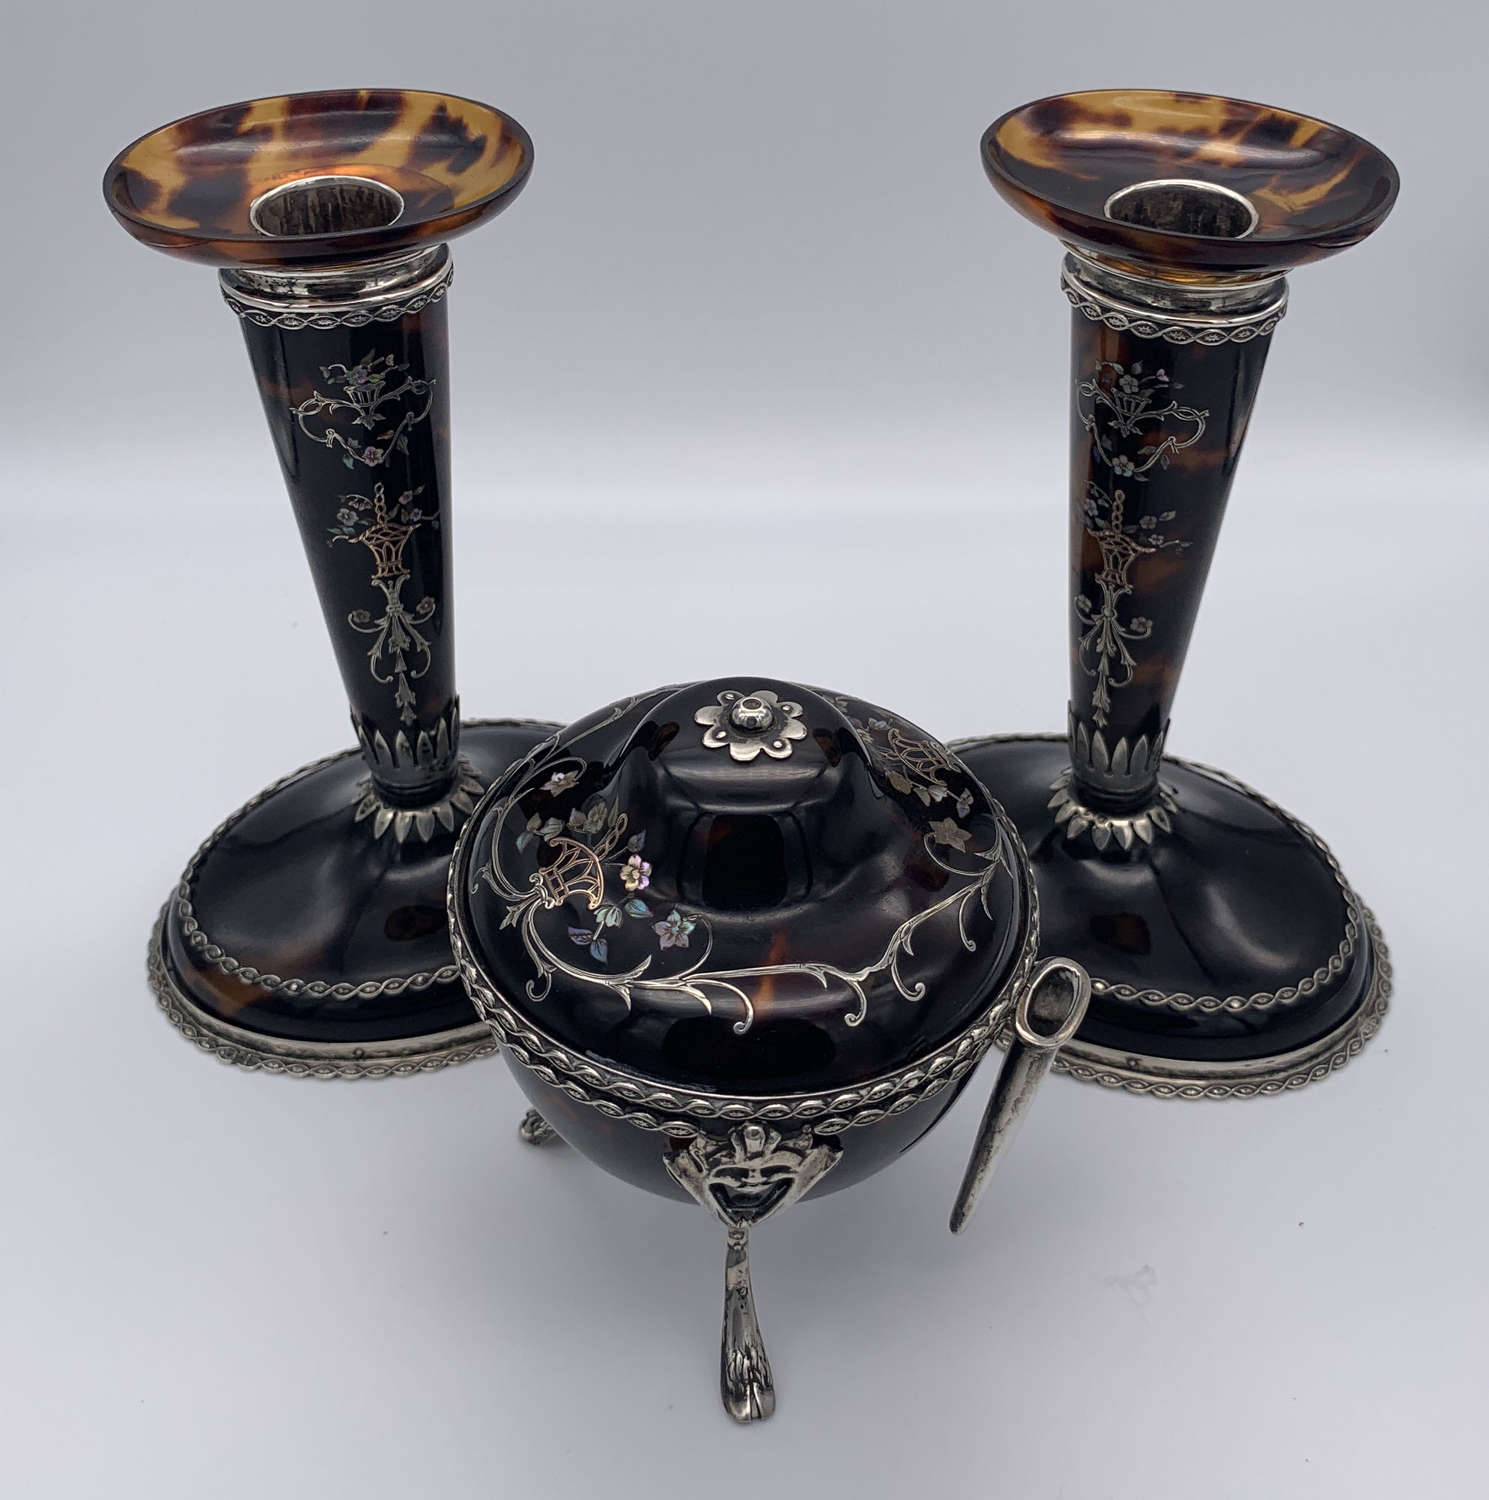 A pair of tortoiseshell and silver candlesticks and string pot